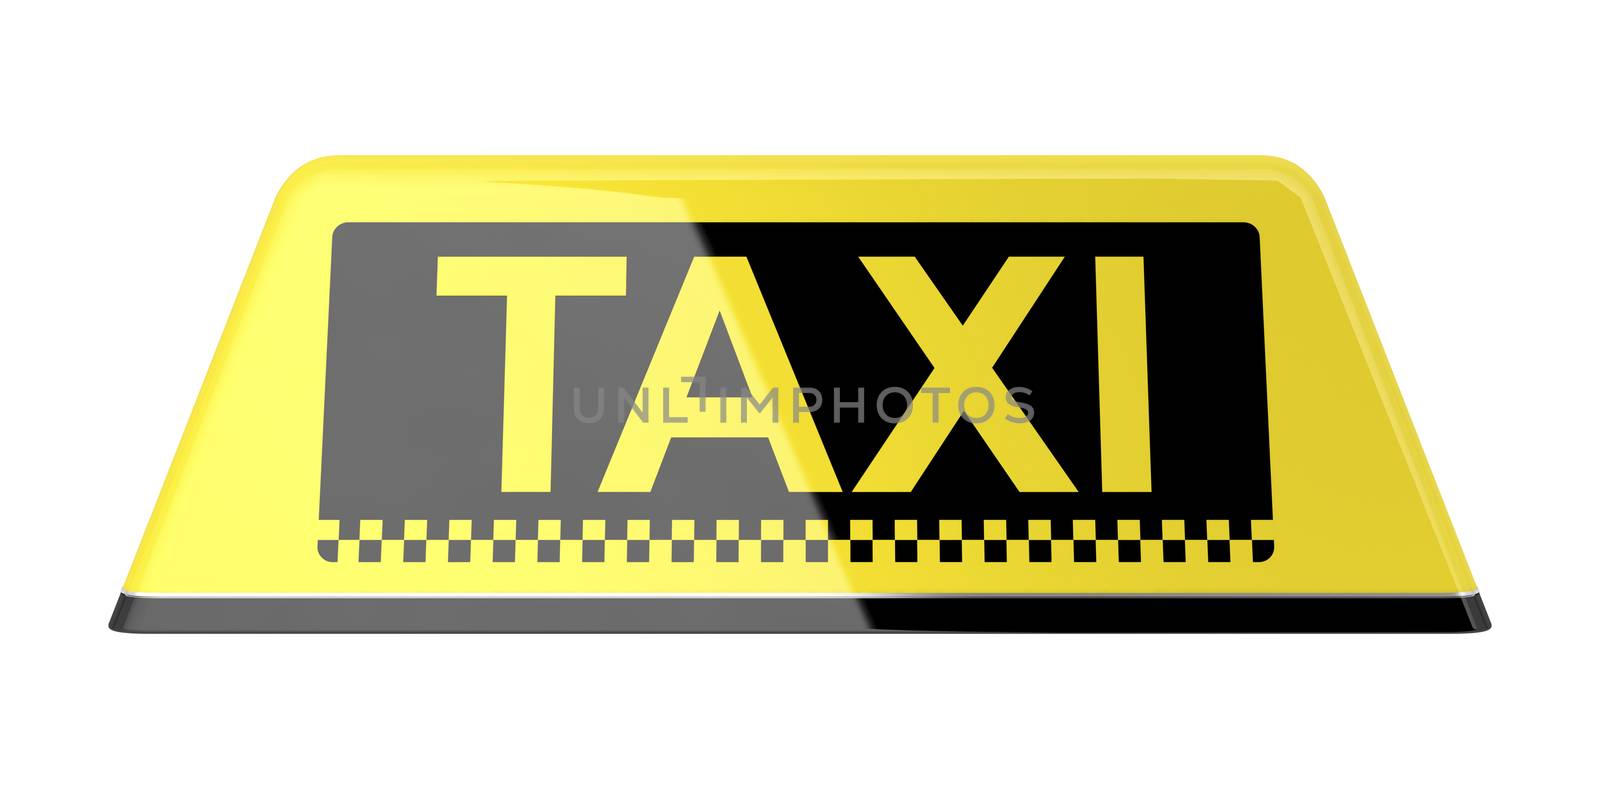 Taxi sign by magraphics